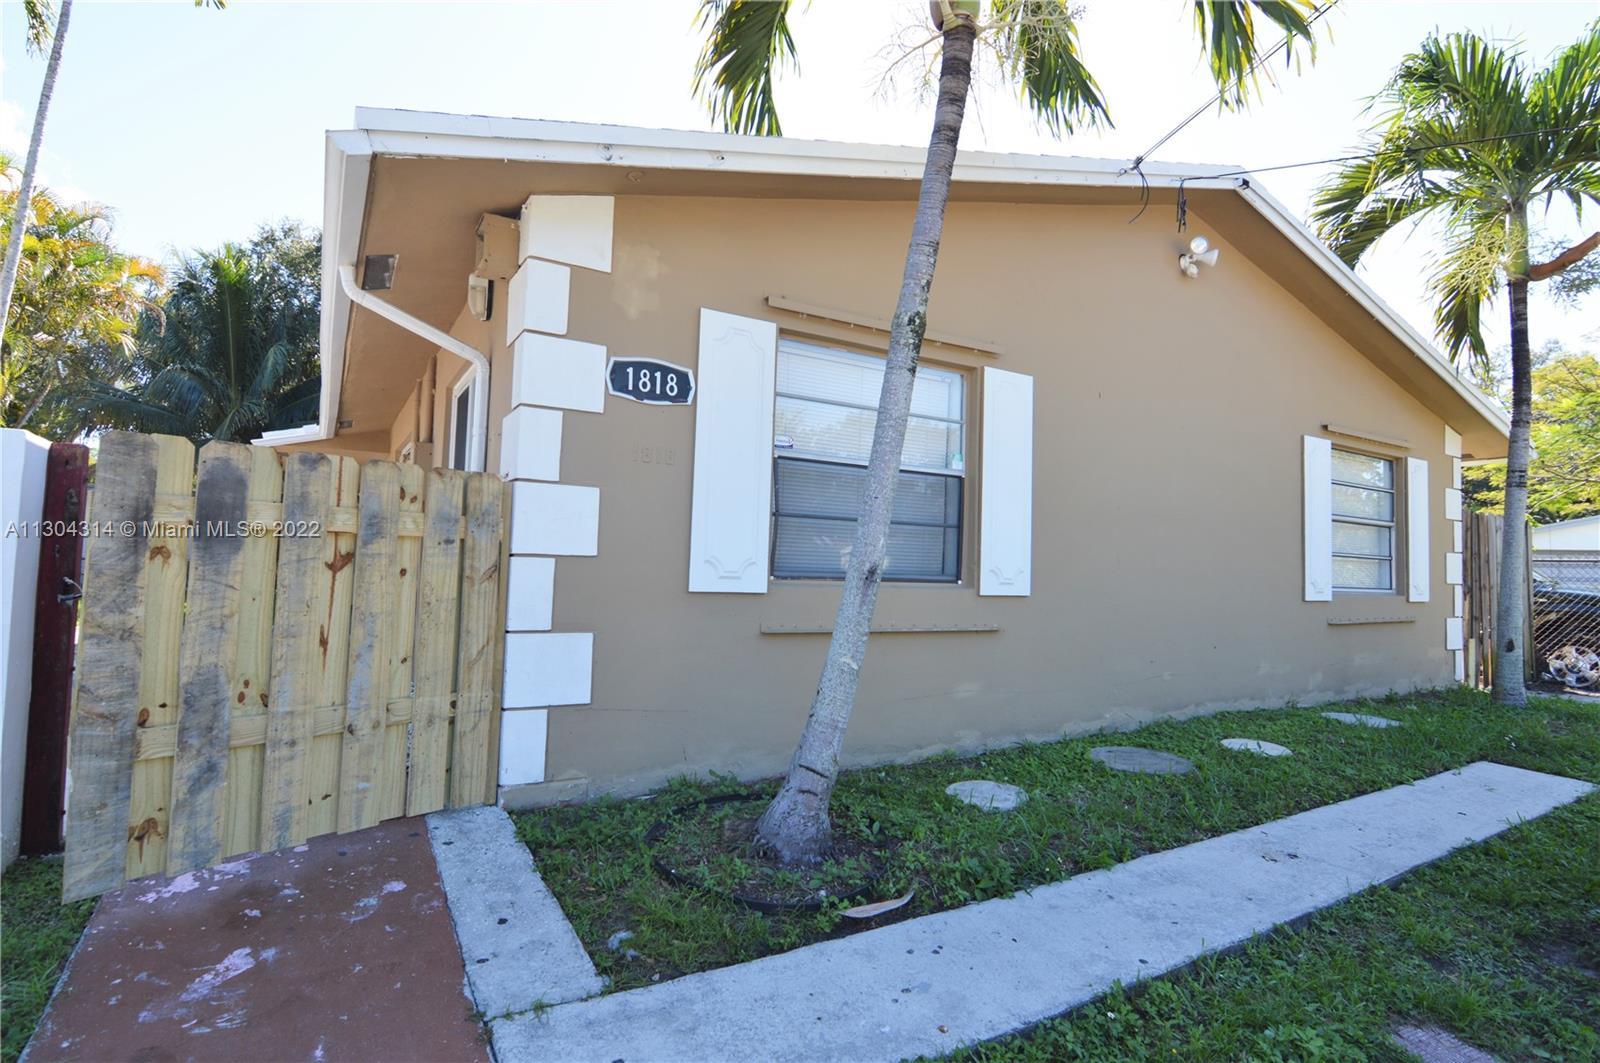 Triplex Home in the Desired Fort Lauderdale Neighborhood, 3 Units total with 2/1, 2/1 and Studio. Ho